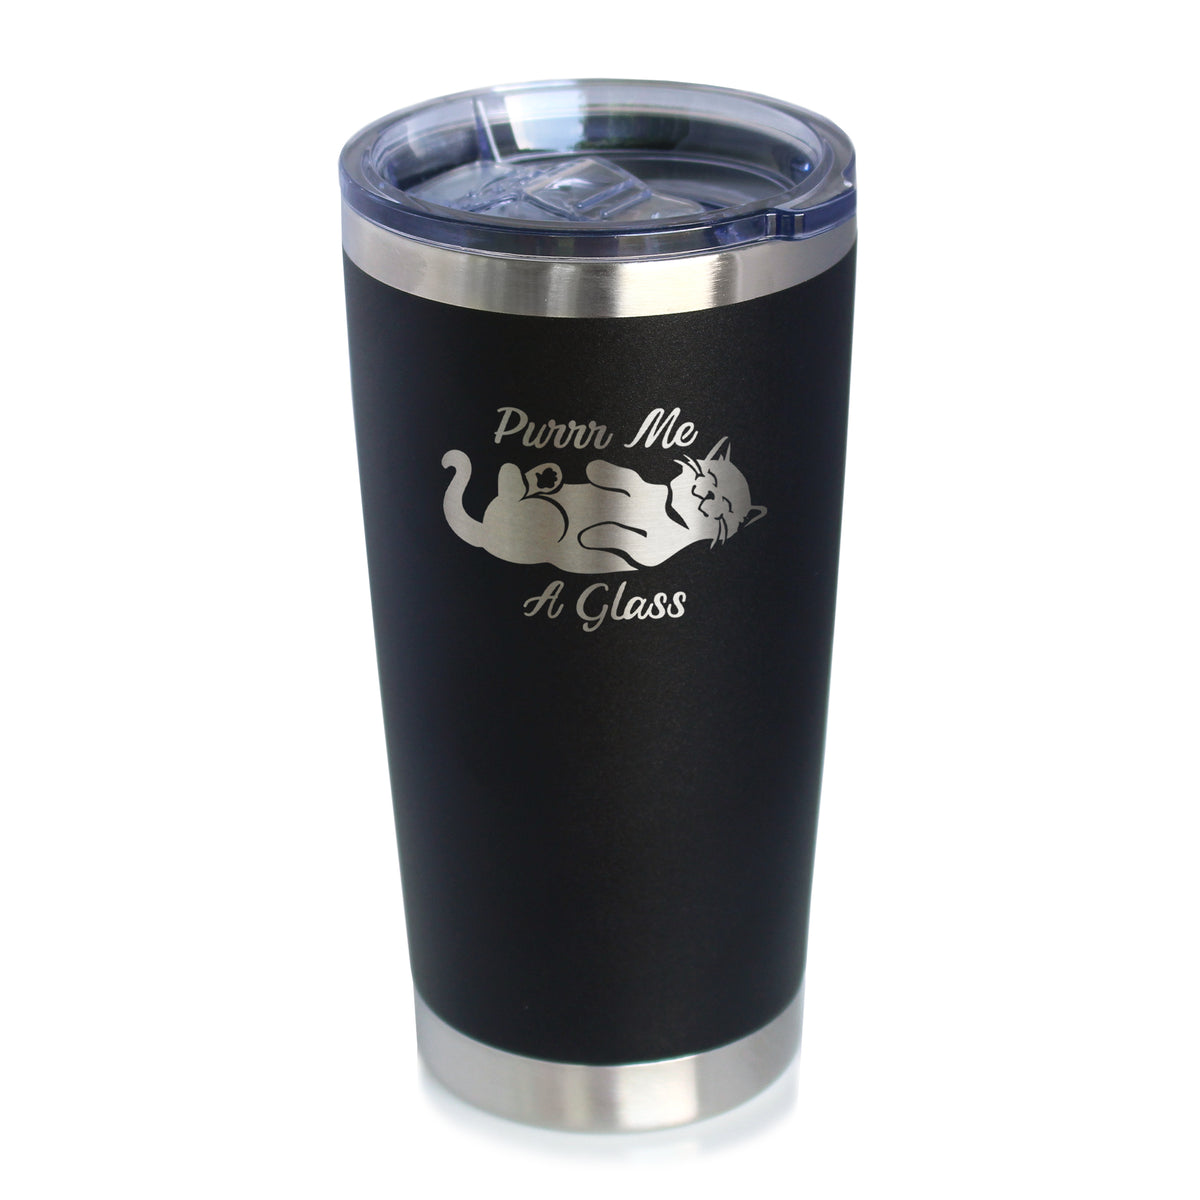 Purr Me A Glass - Insulated Coffee Tumbler Cup with Sliding Lid - Stainless Steel Insulated Mug - Fun Unique Cat Themed Décor and Gifts